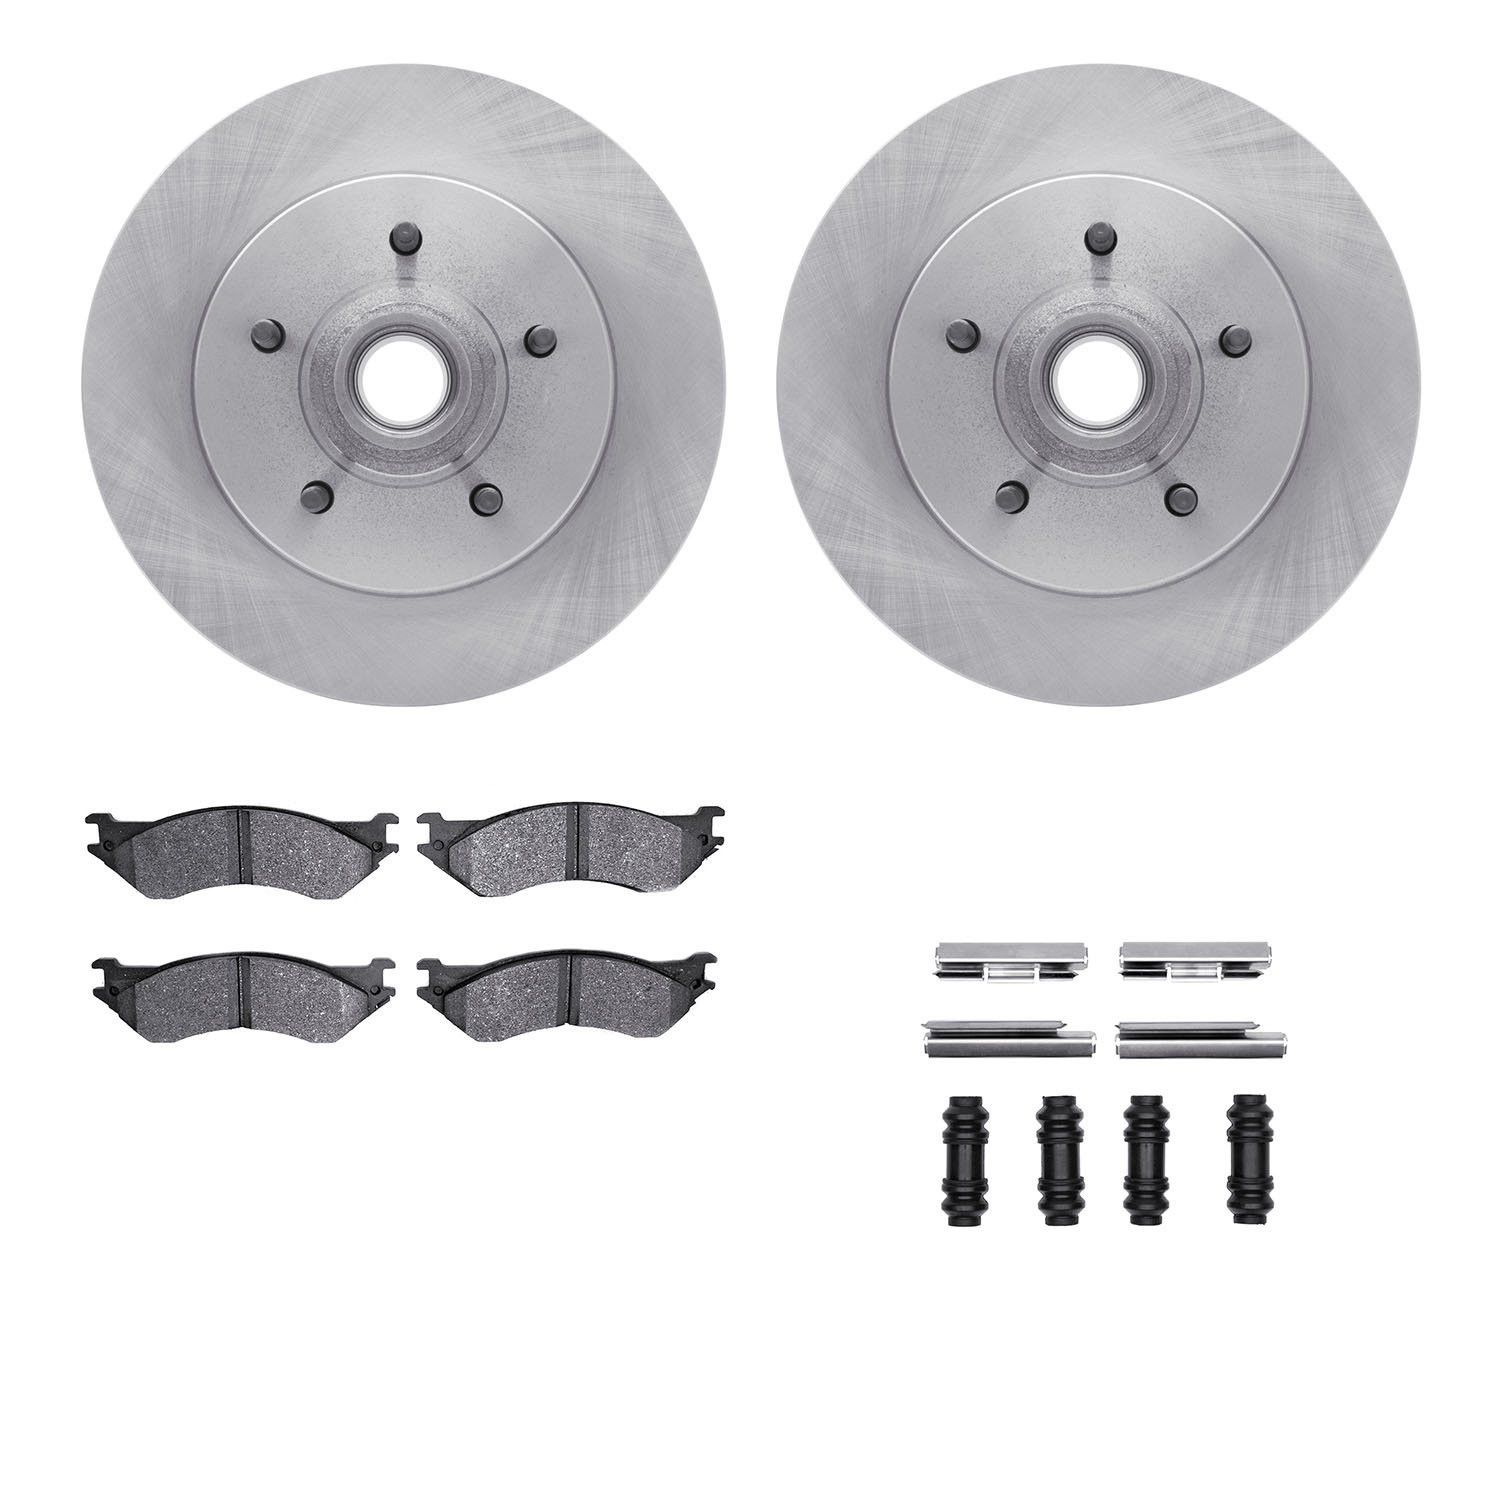 6412-54113 Brake Rotors with Ultimate-Duty Brake Pads Kit & Hardware, 1997-2000 Ford/Lincoln/Mercury/Mazda, Position: Front